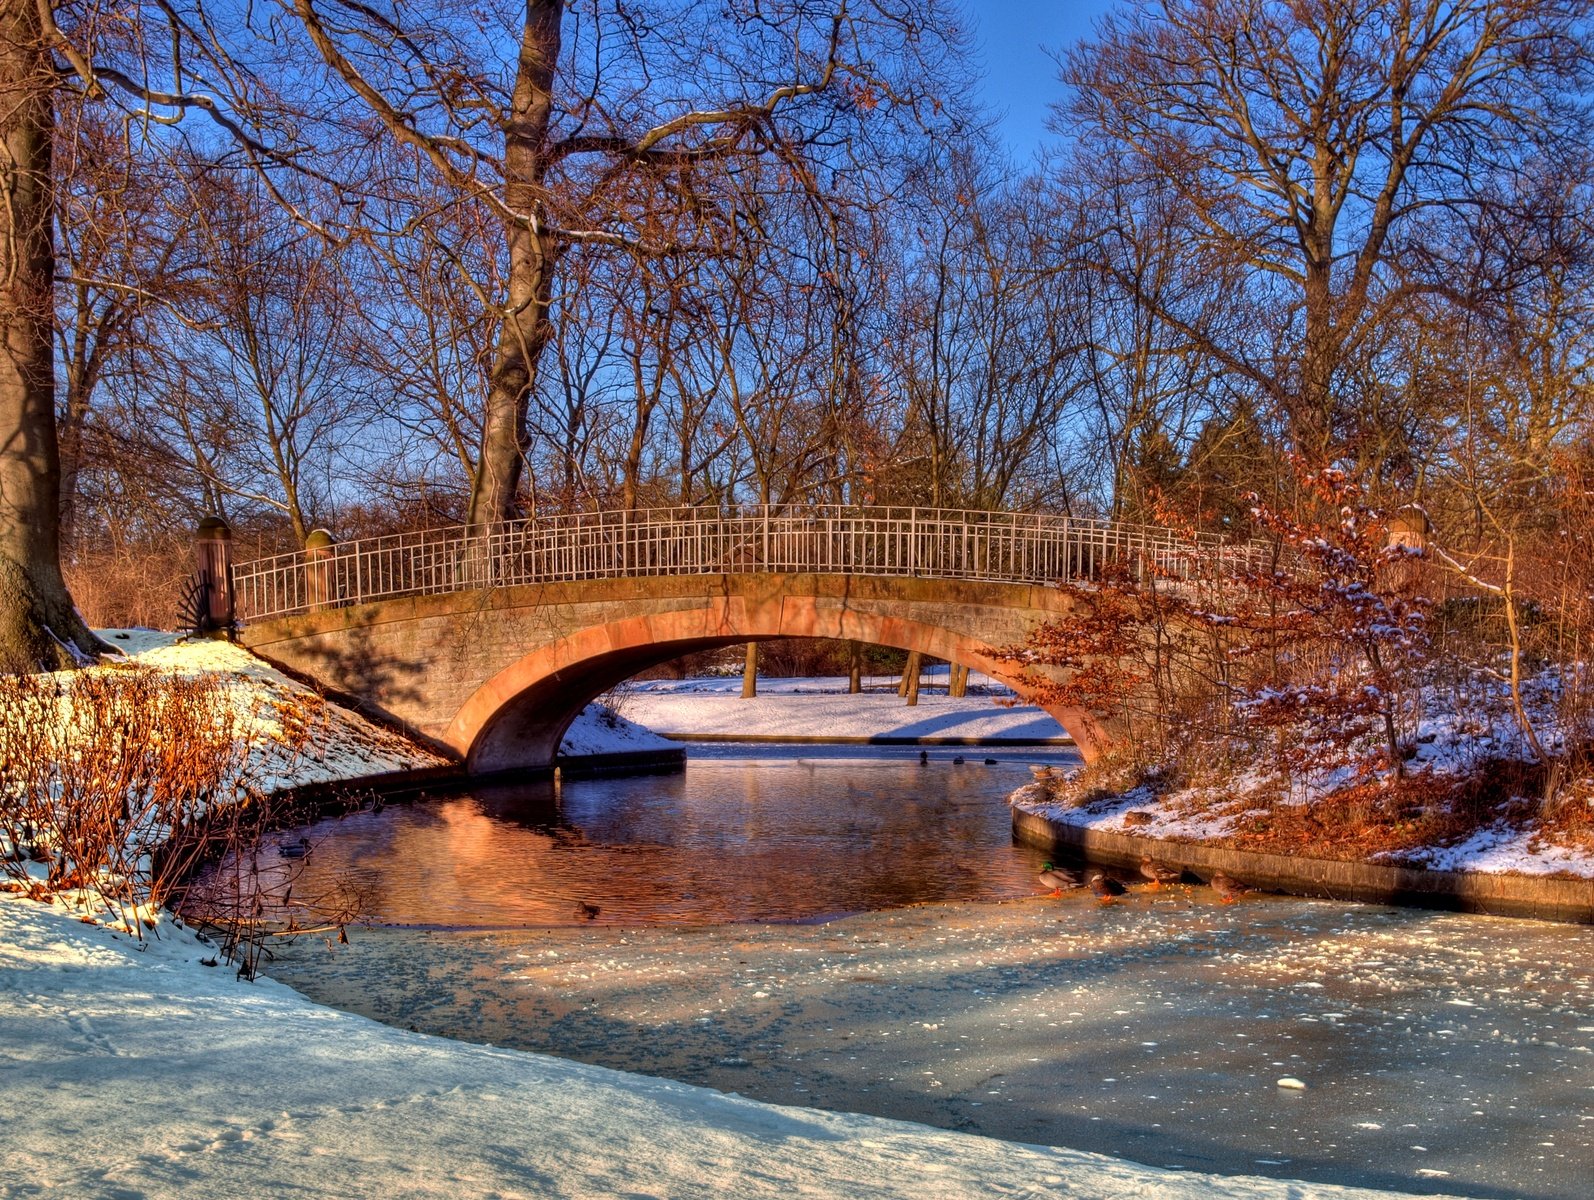 bridge with arch over river surrounded by snow